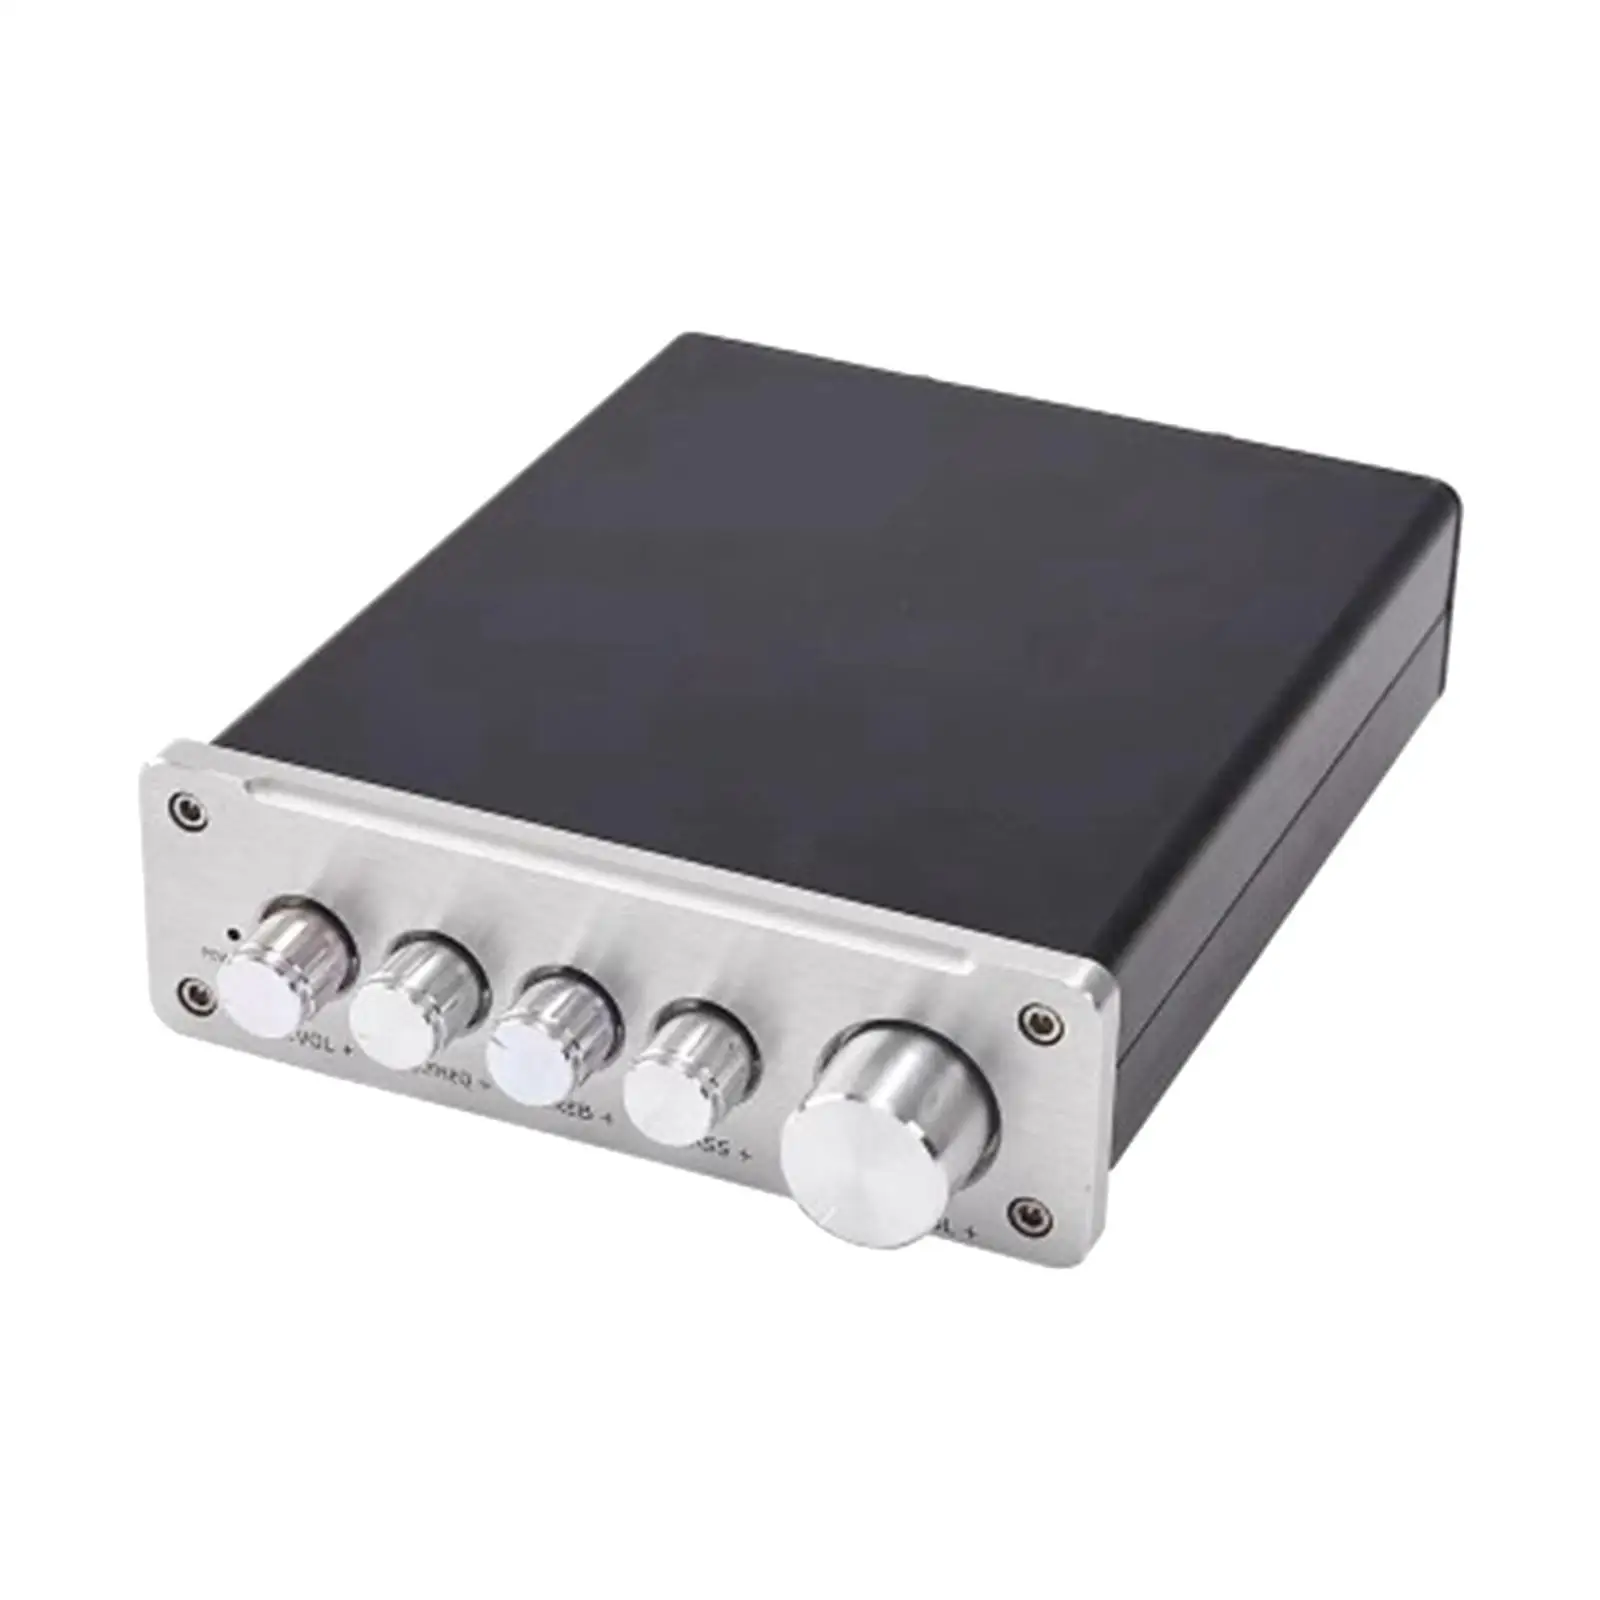 Power Amplifier D3 Professional with Volume Adjustment Knob HiFi Surround Sound for Home Outdoor Performances Party Outdoor KTV